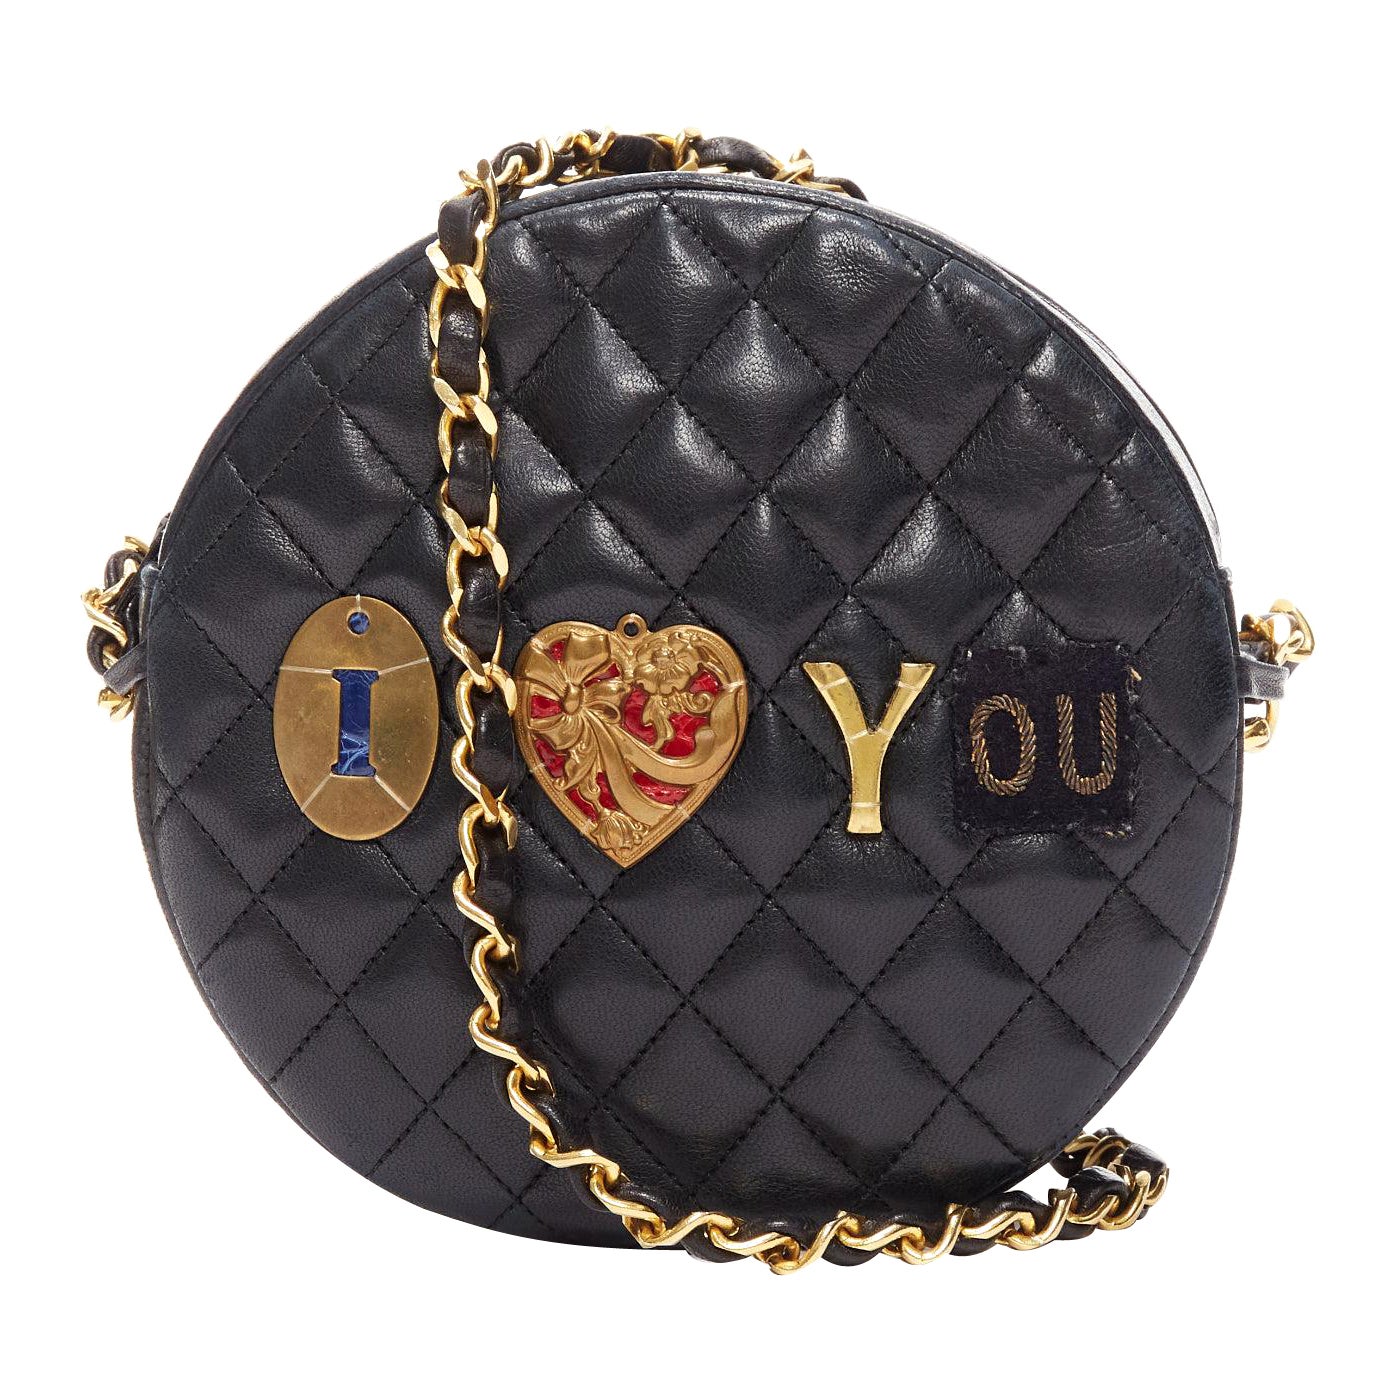 TIGER IN THE RAIN CHANEL Vintage I Love You applique round crossbody chain bag For Sale